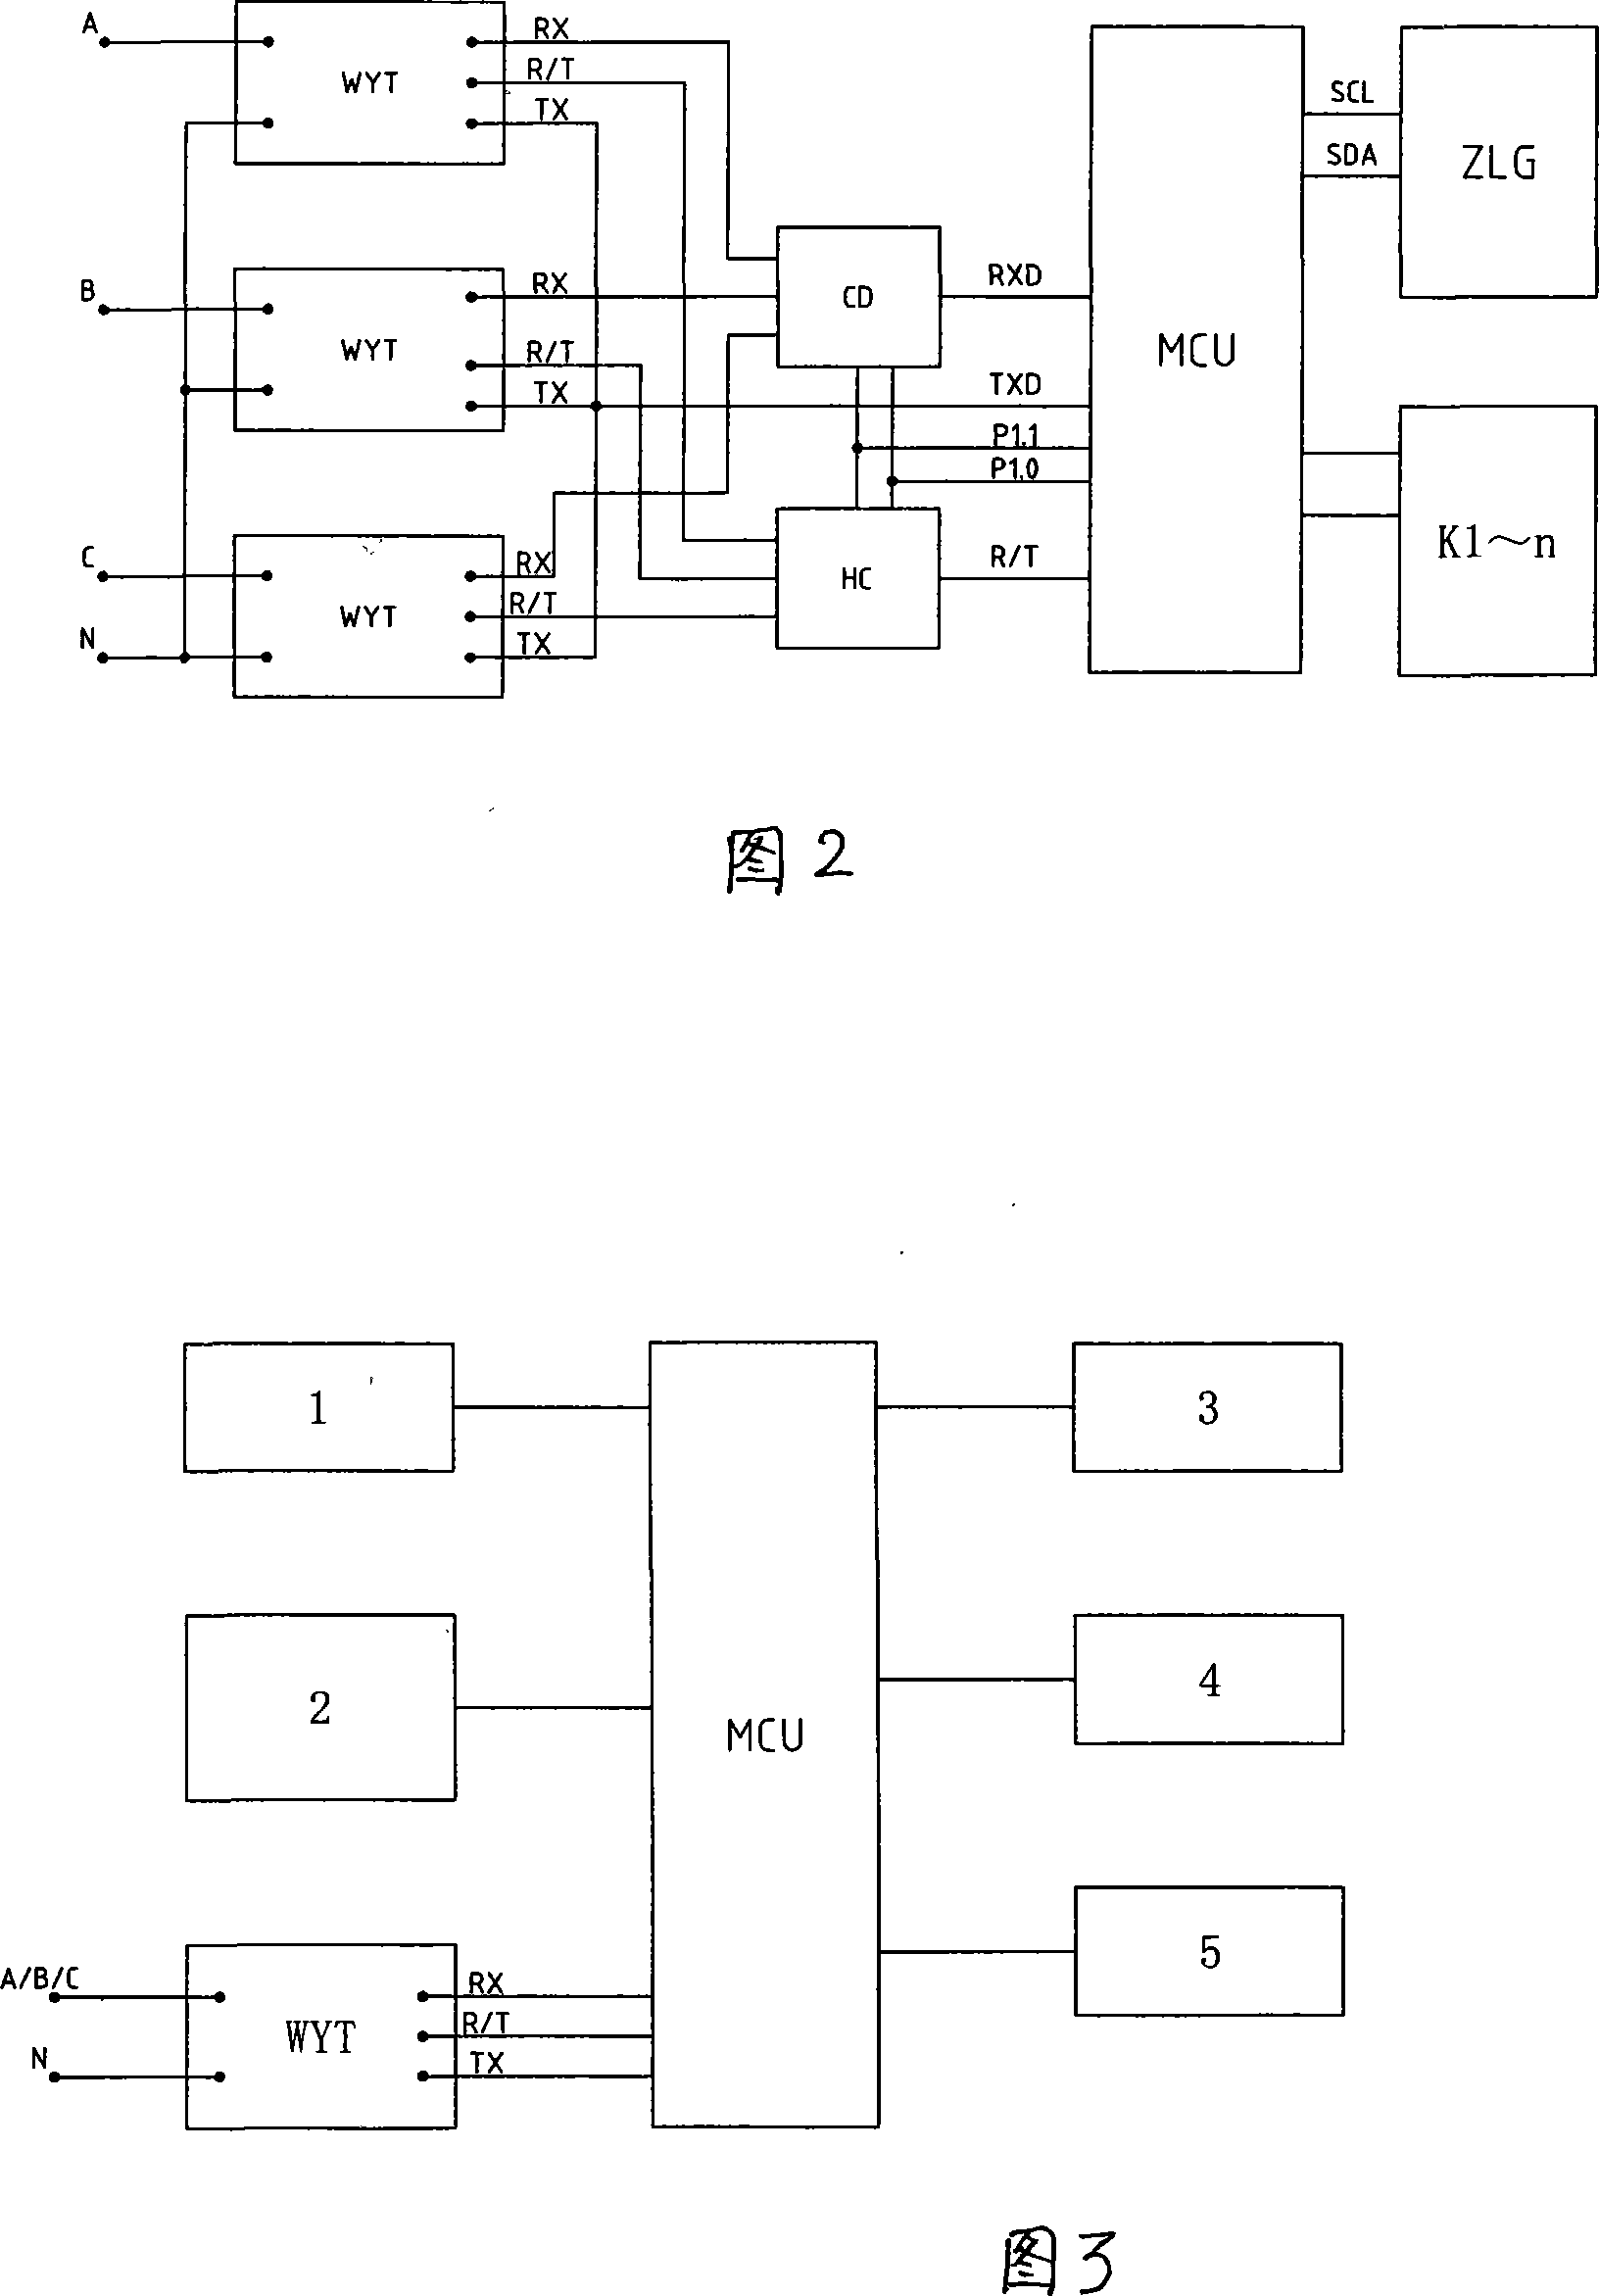 Multi-level switch system for power line disconnection protection